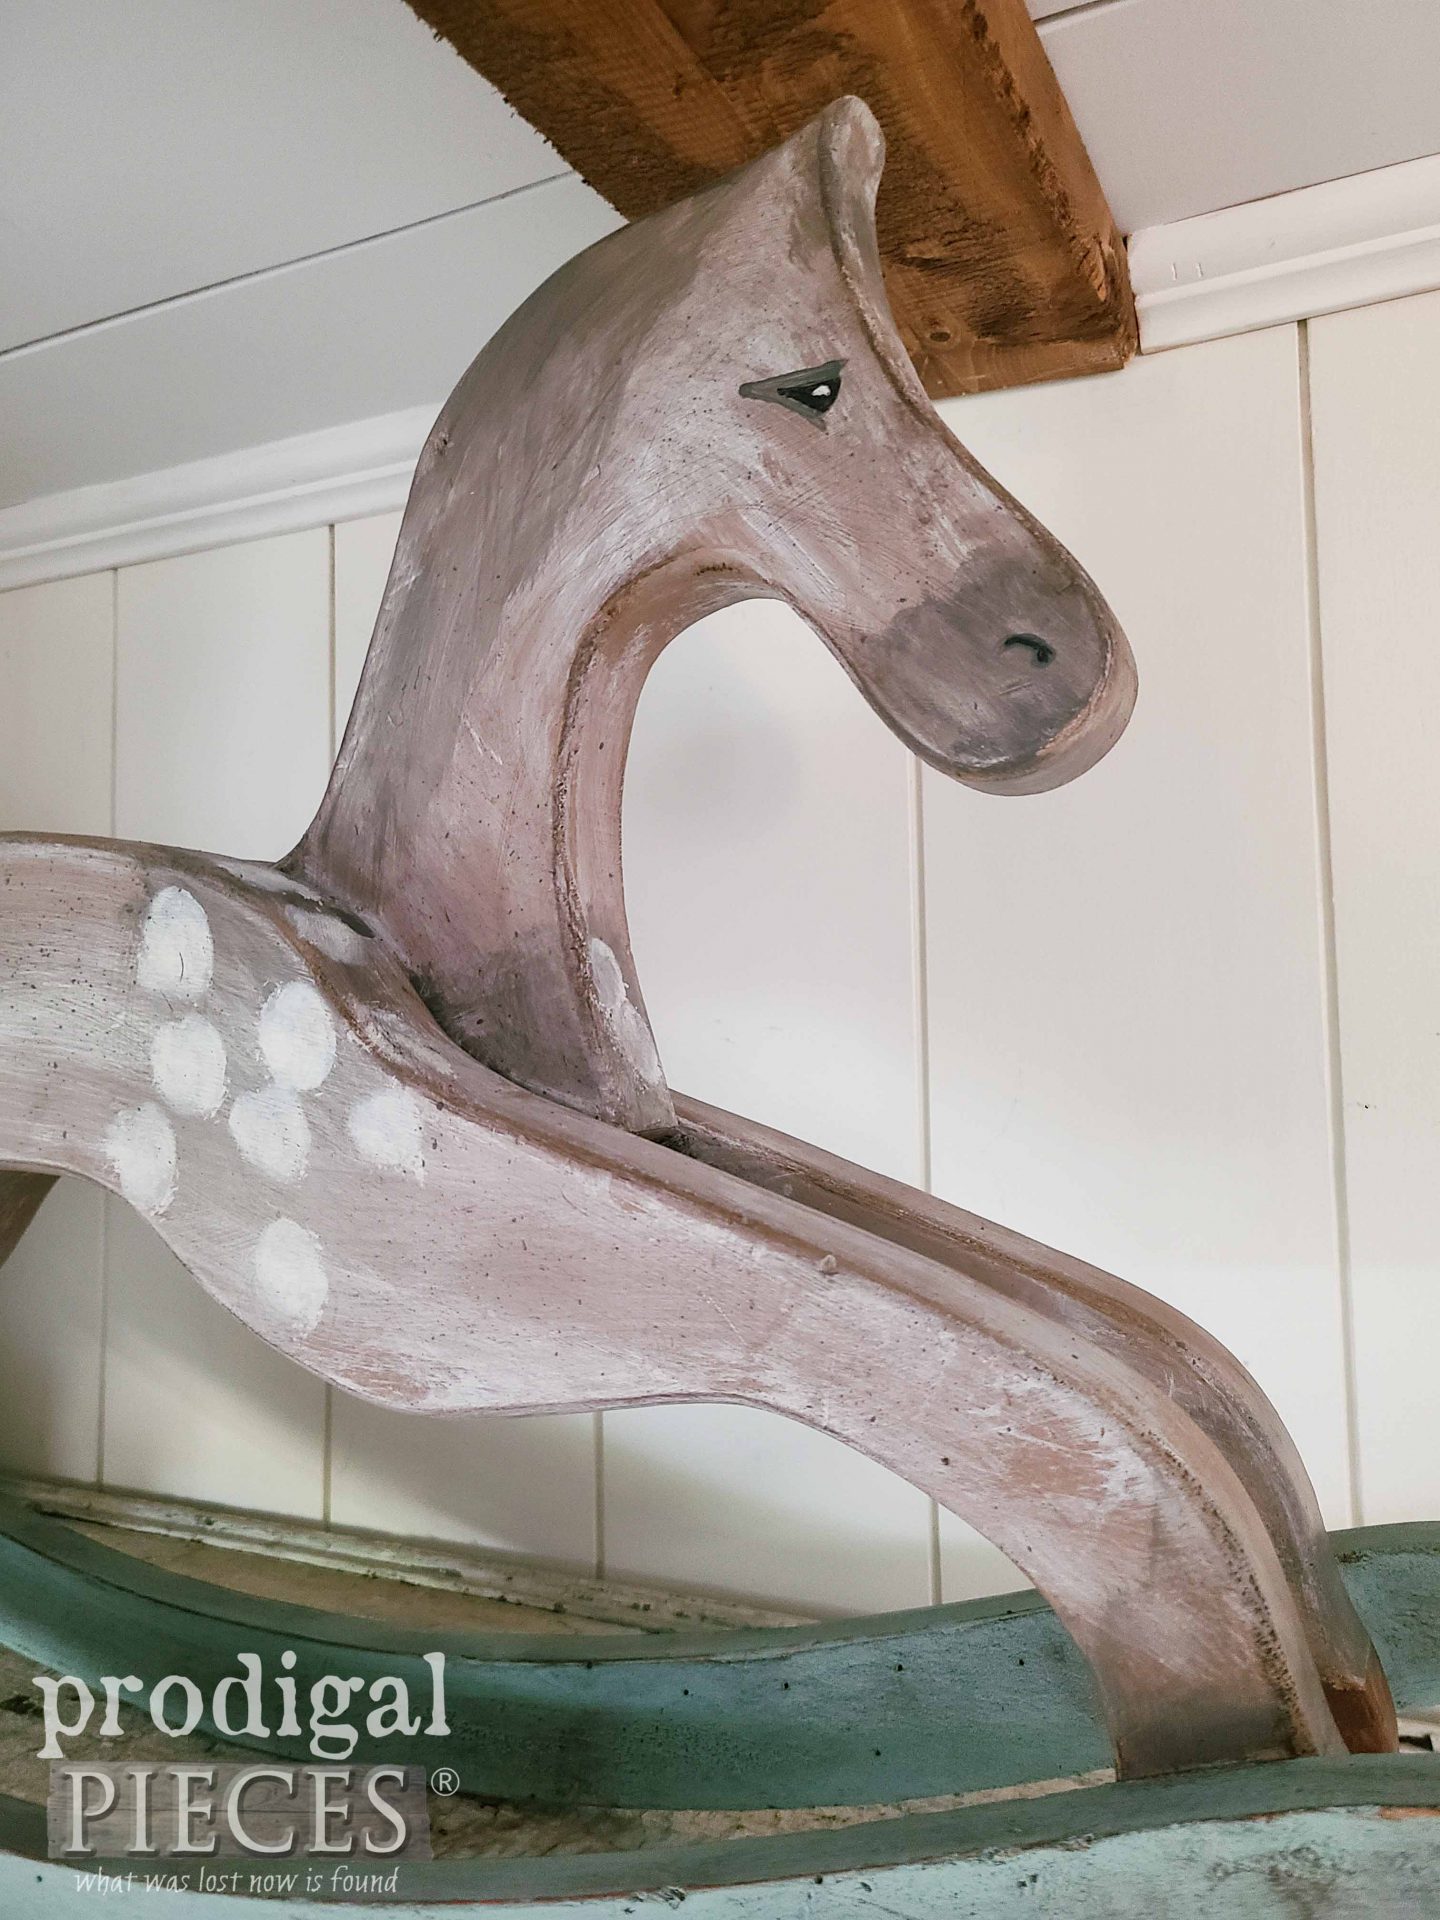 Hand-Painted Rocking Horse by Larissa of Prodigal Pieces | prodigalpieces.com #prodigalpieces #handmade #horse #diy #gift